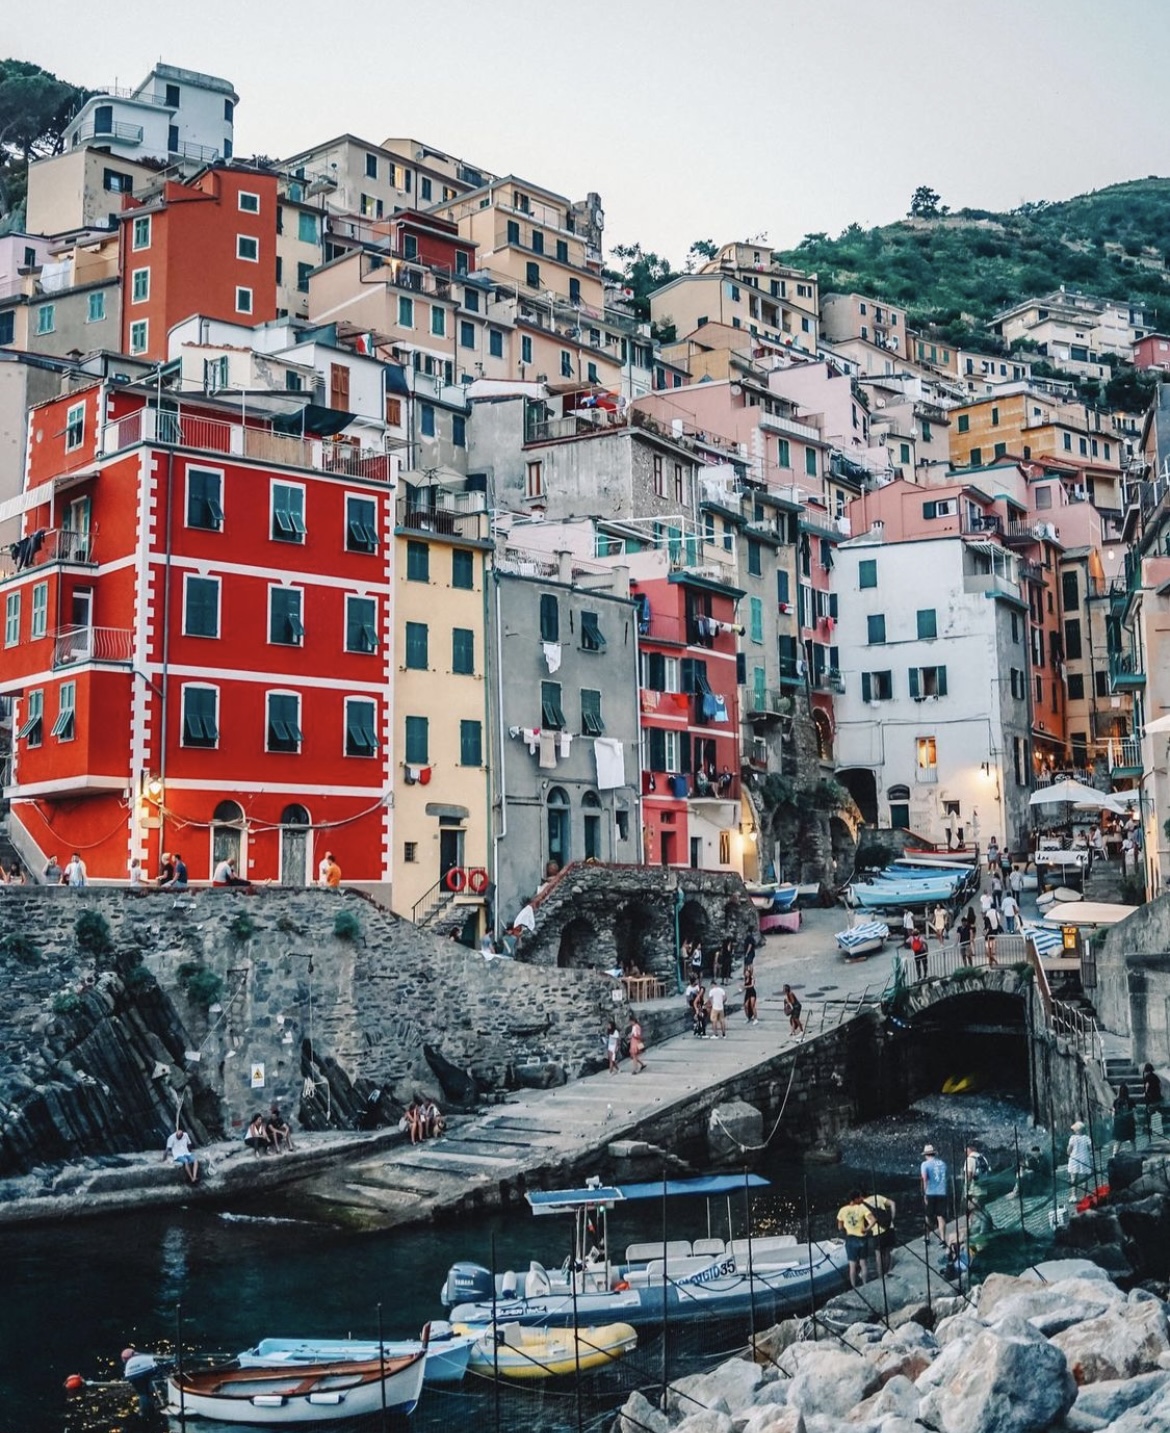 Italy Honeymoon Itinerary: 10 days in Cinque Terre, Florence & Rome